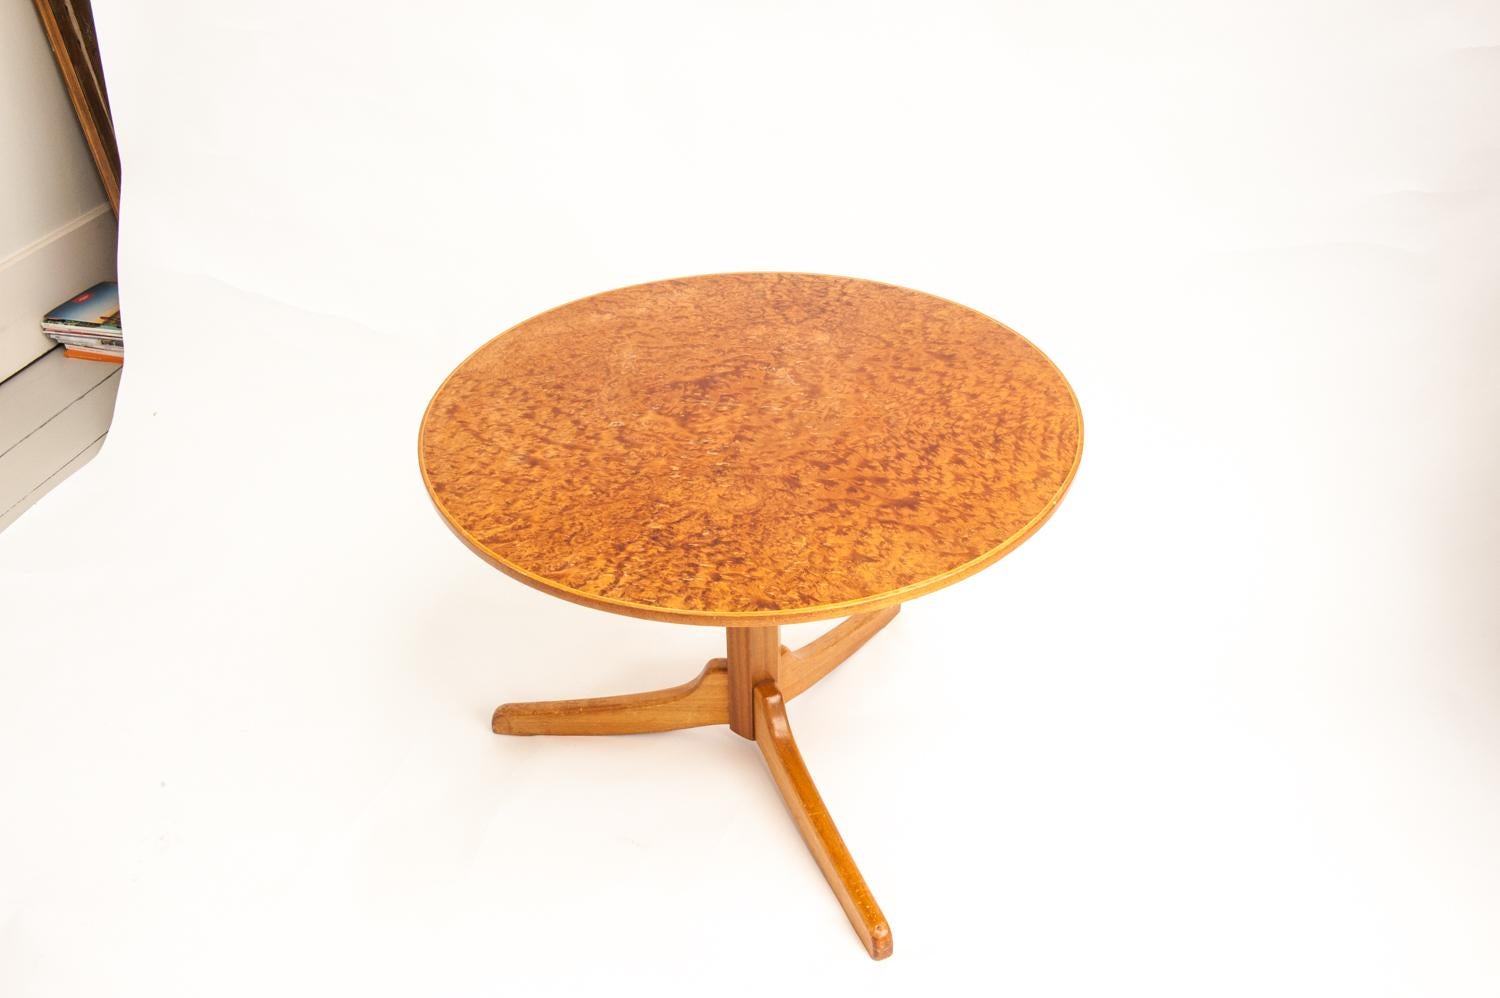 A unique and beautiful round table, model no. 560. Table, octagonal pedestal and three feet, made of solid mahogany. Round top with ambiona burl veneer.

Designed in 1932 by Josef Frank for Svenskt Tenn. Manufactured by Karl Holmberg AB in the mid